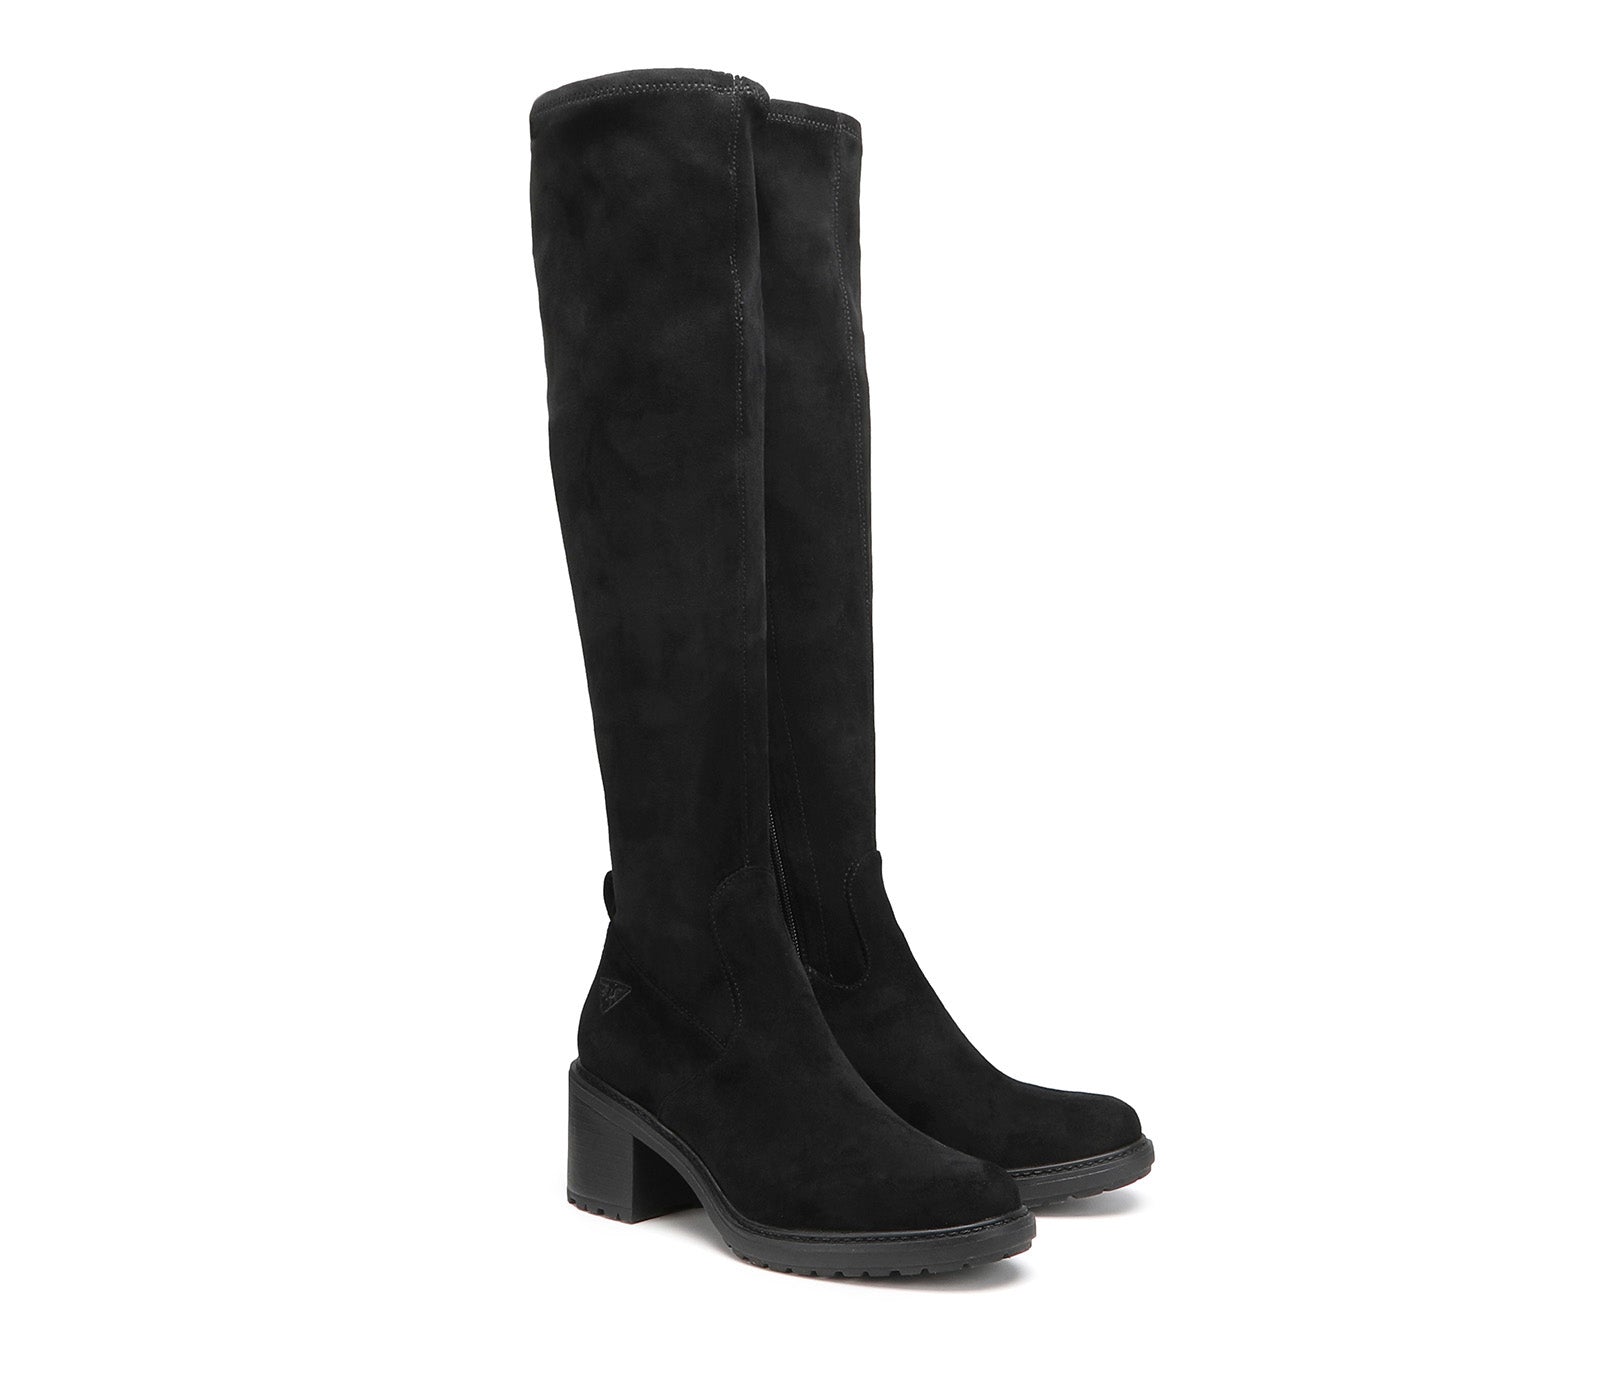 Stivalida Women's Knee High in Black Suede Stretch Leather